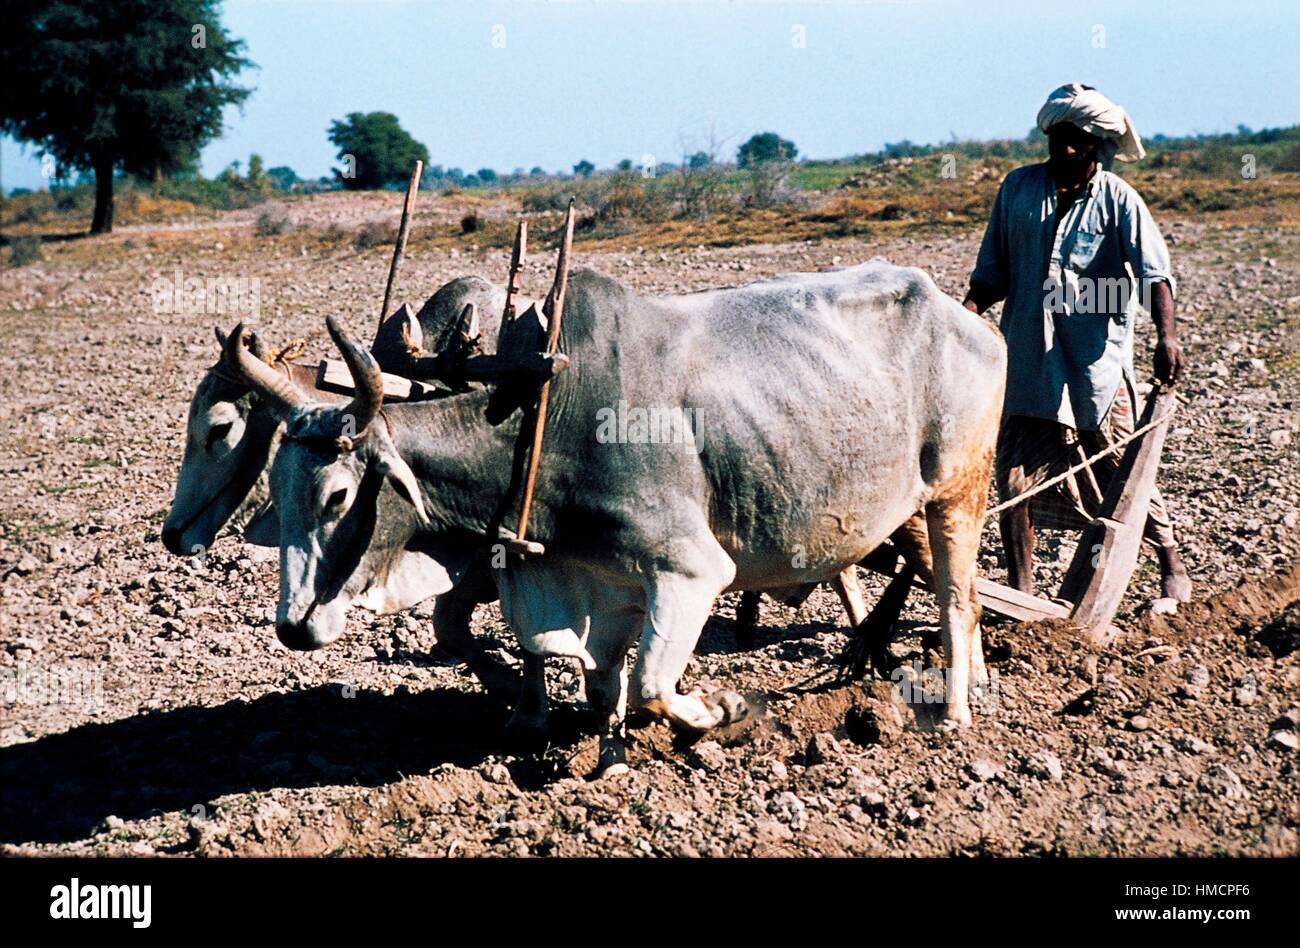 Farmer using a plow drawn by oxen, India. Stock Photo